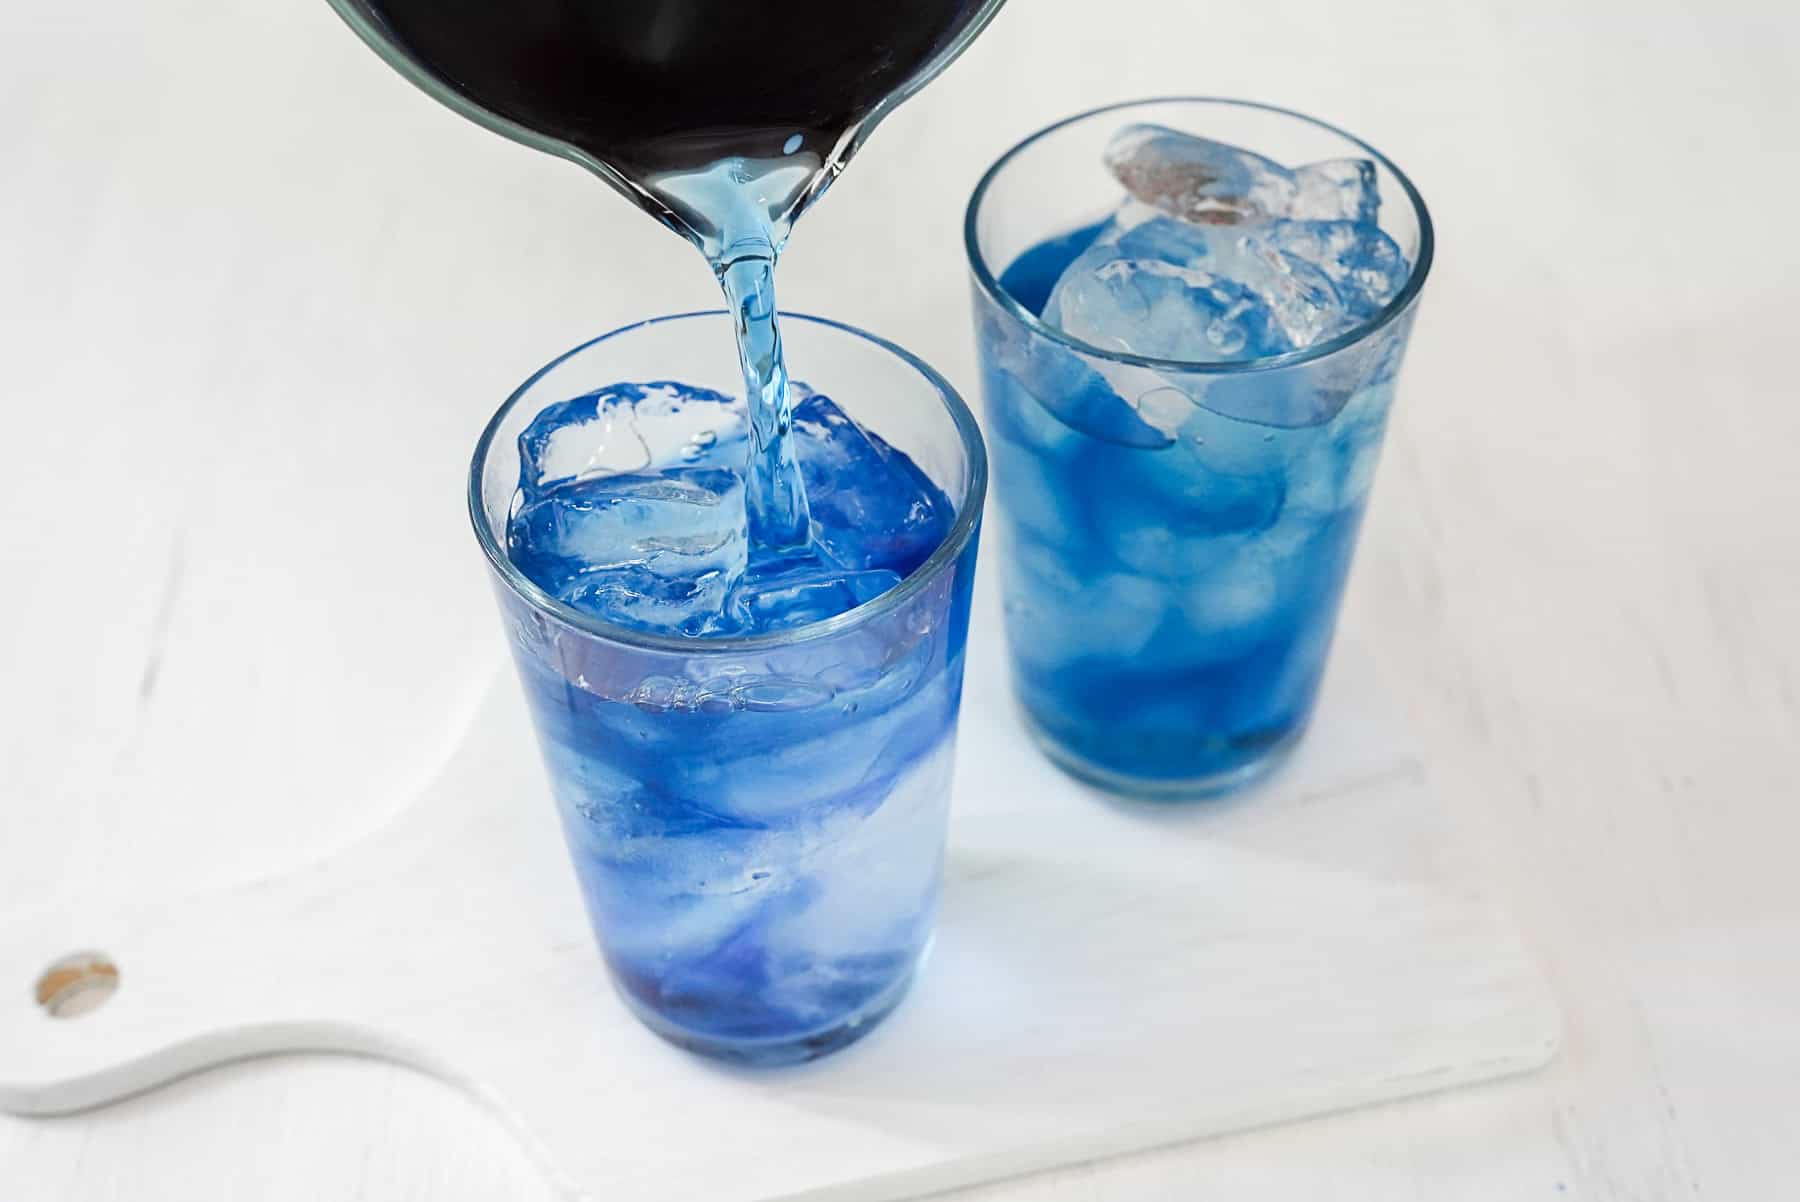 Pour butterfly pea tea into glass